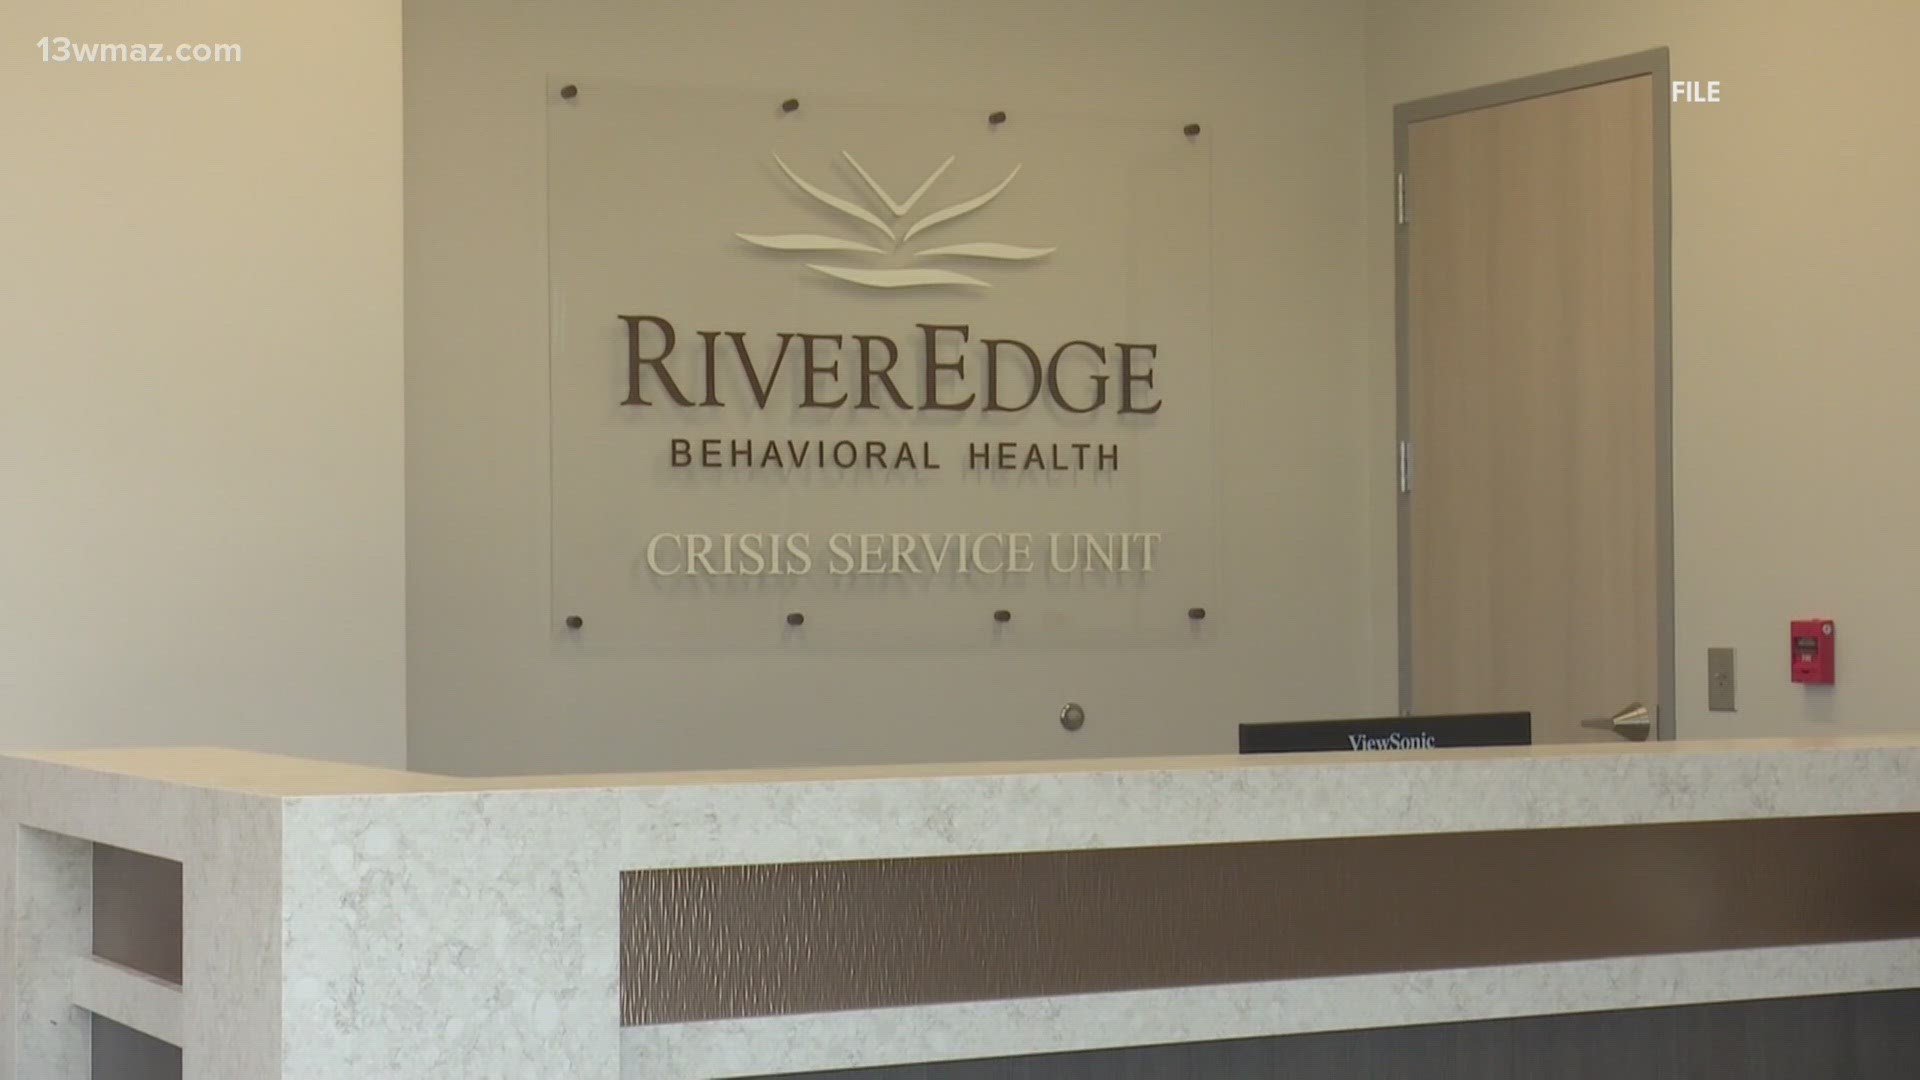 River Edge Behavioral Health plans to offer services that will address the need for mental health and addiction services right here in Central Georgia.